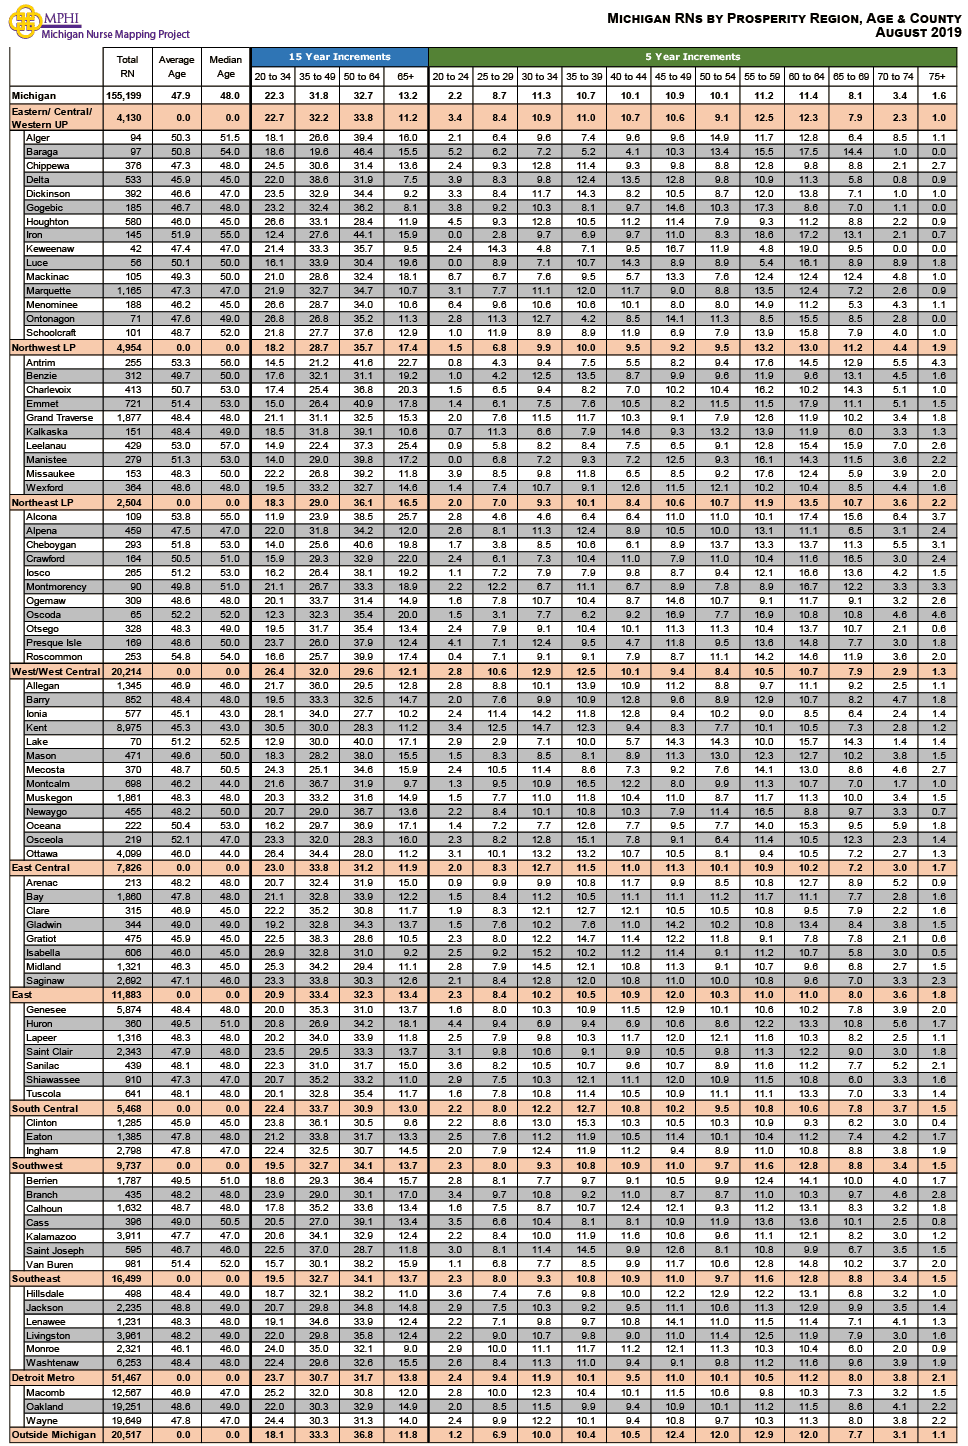 table depicting Michigan's Licensed Registered Nurses by age groups, county and prosperity regions in 2019